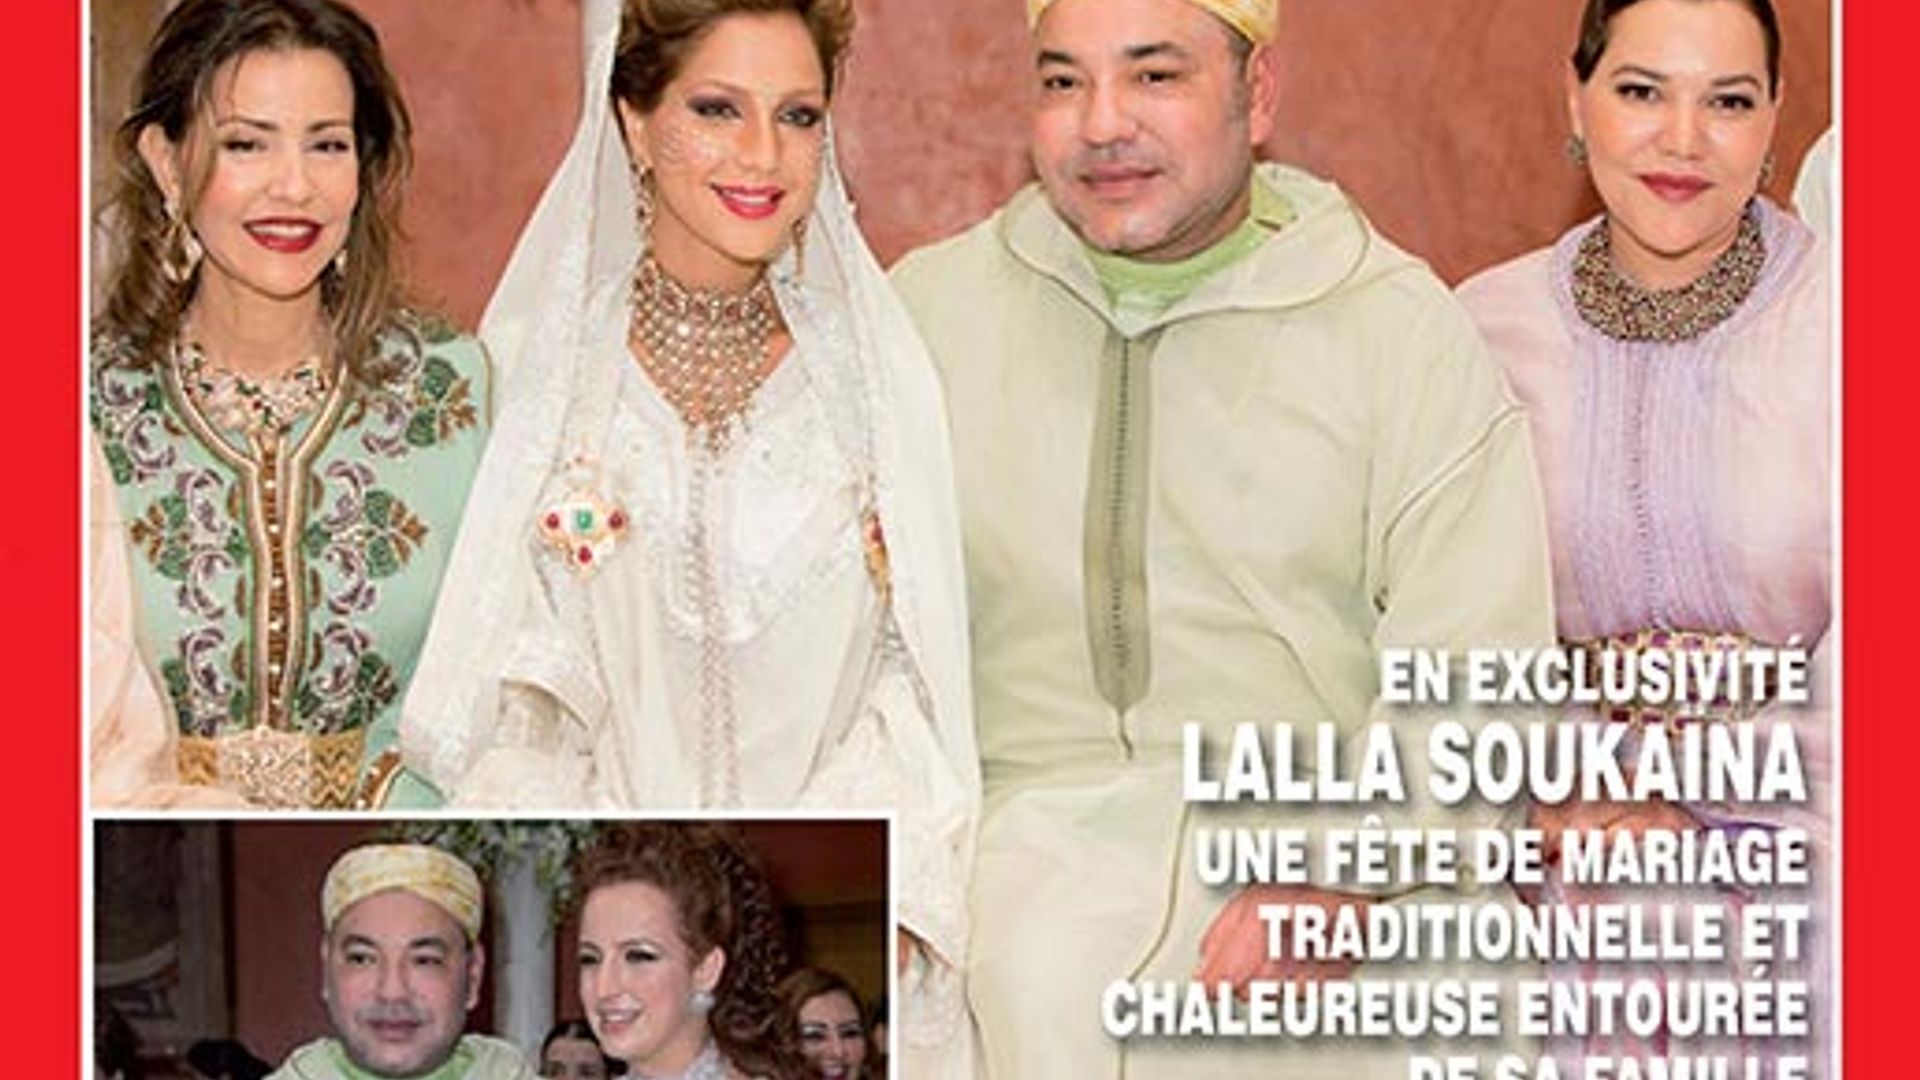 Lalla Soukaina and Mohammed El Mehdi Regragui celebrate their wedding